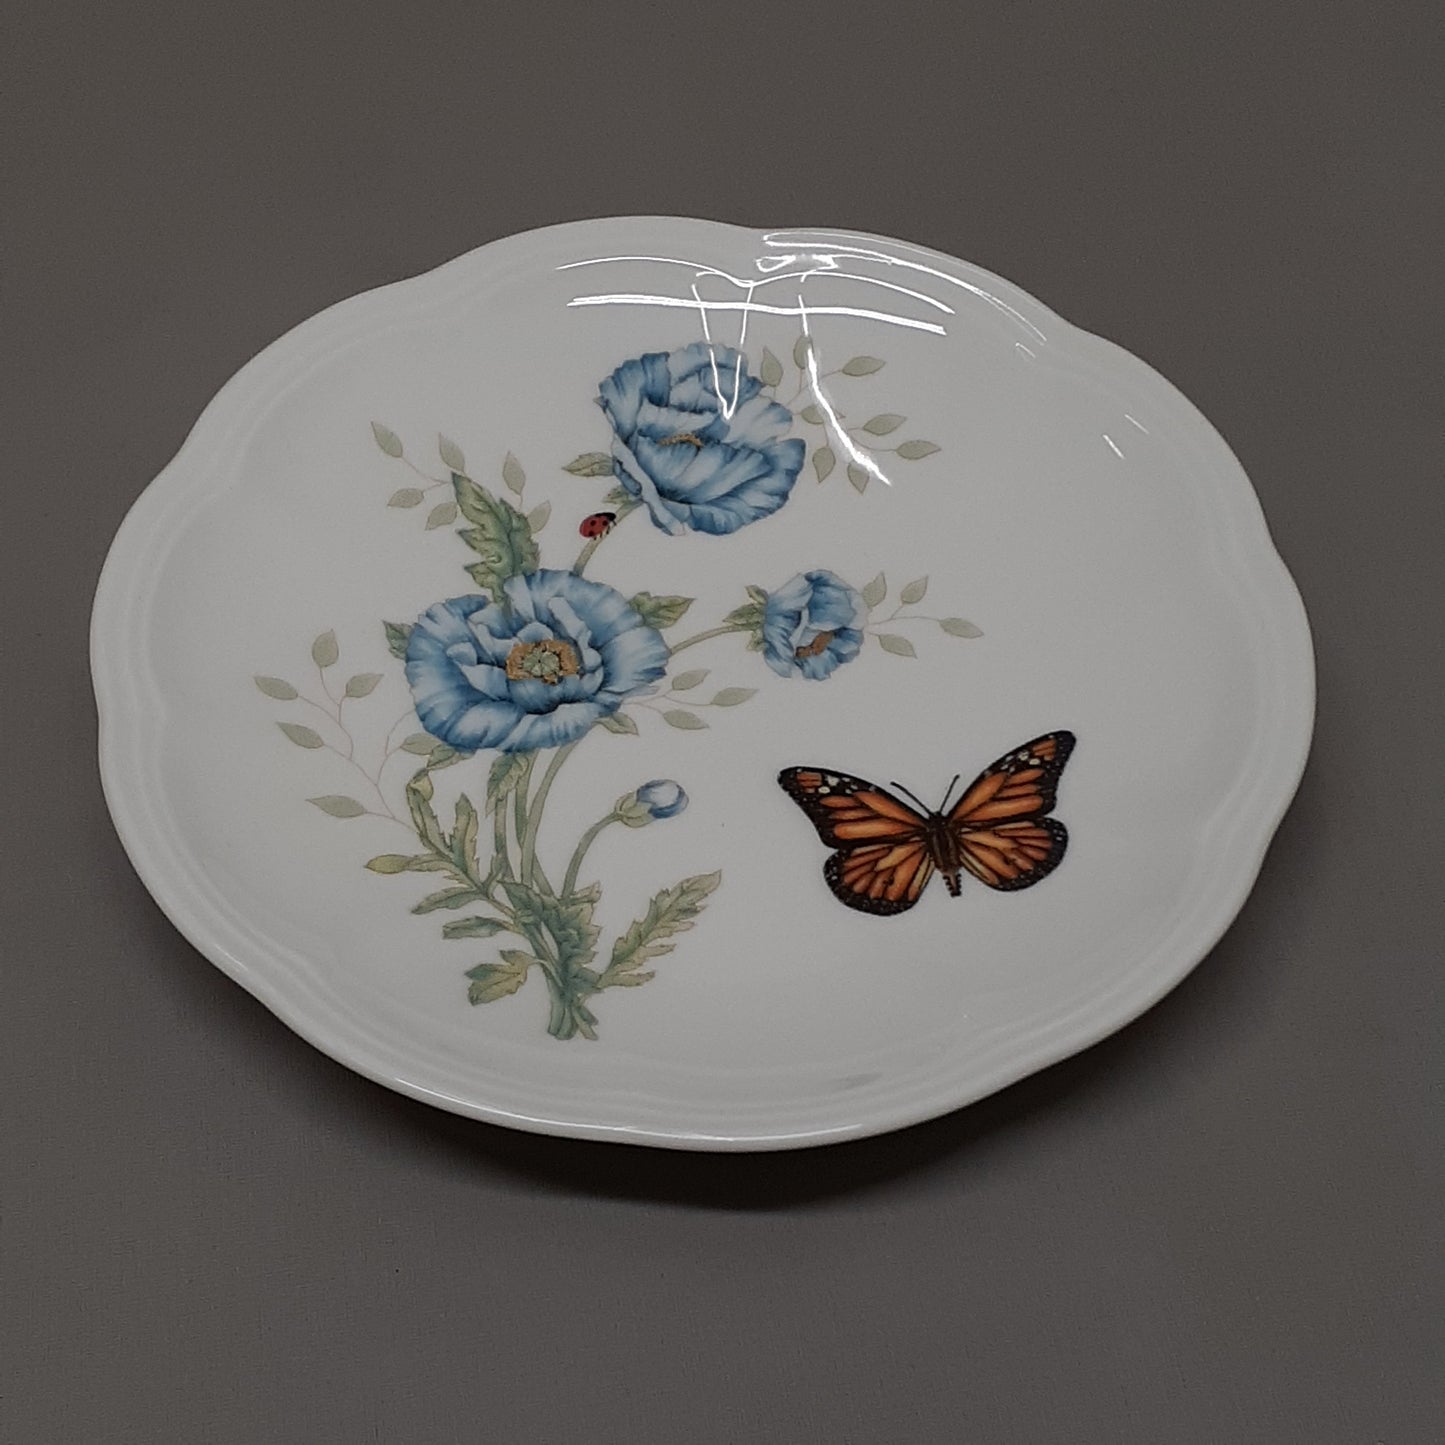 LENOX Butterfly Meadow Tiger Swallowtail Party Plates Set of 6 (New)